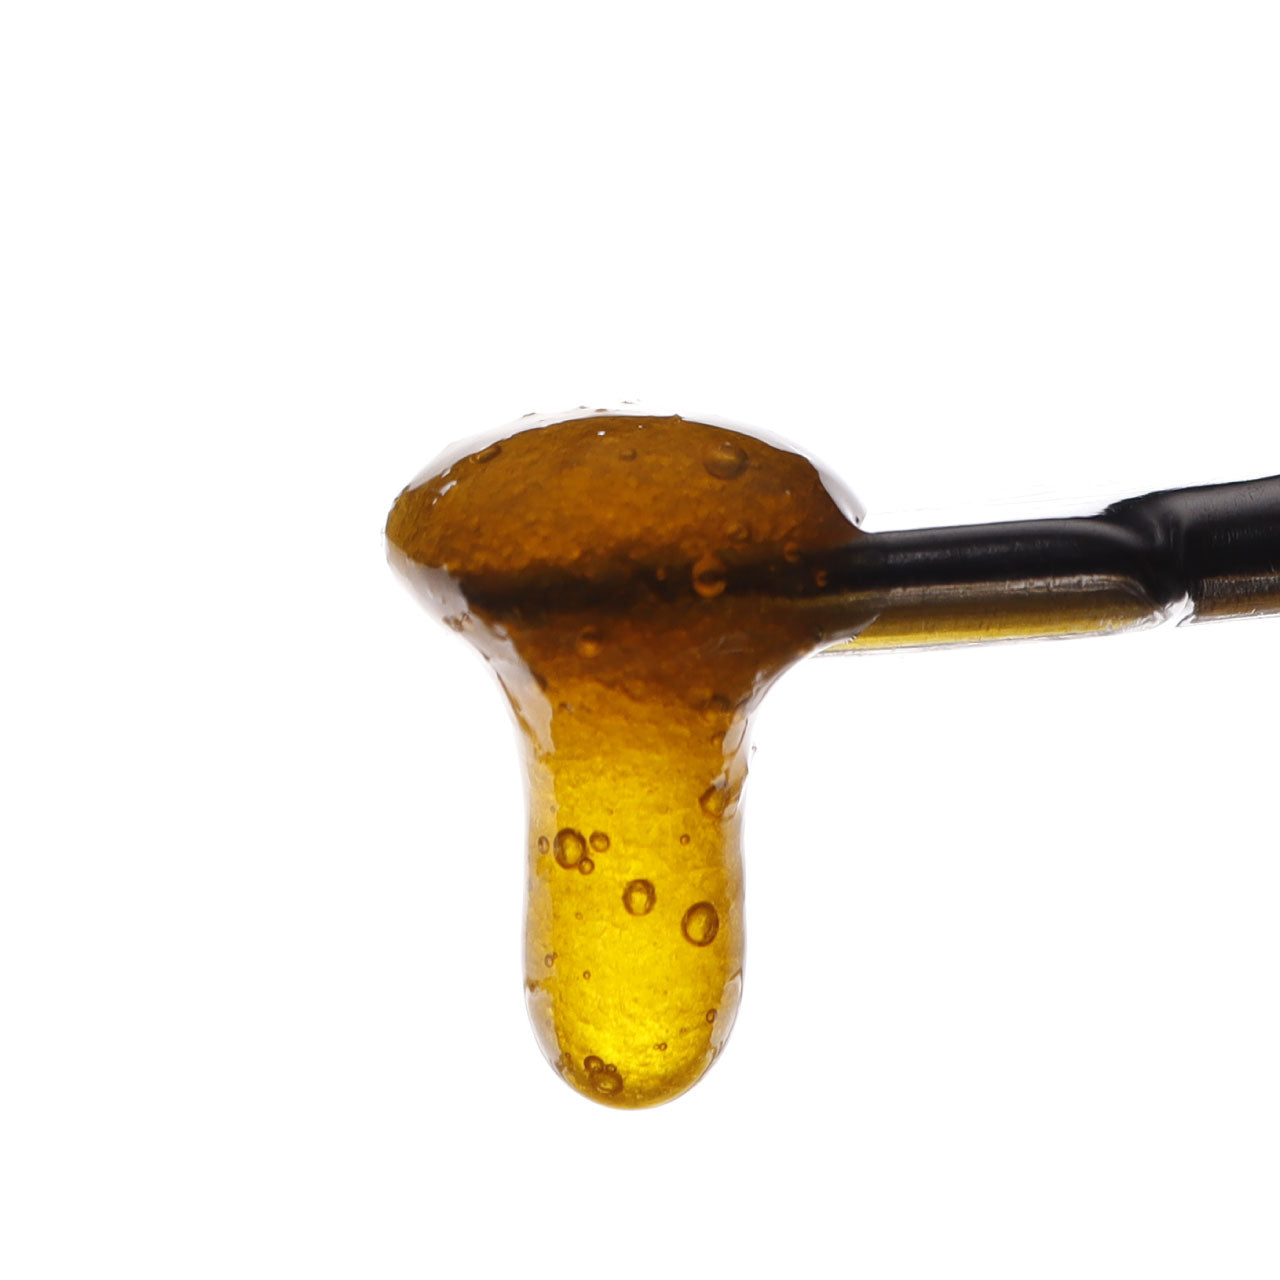 Image of Ak47 CBD Live Resin dripping from a dab tool.